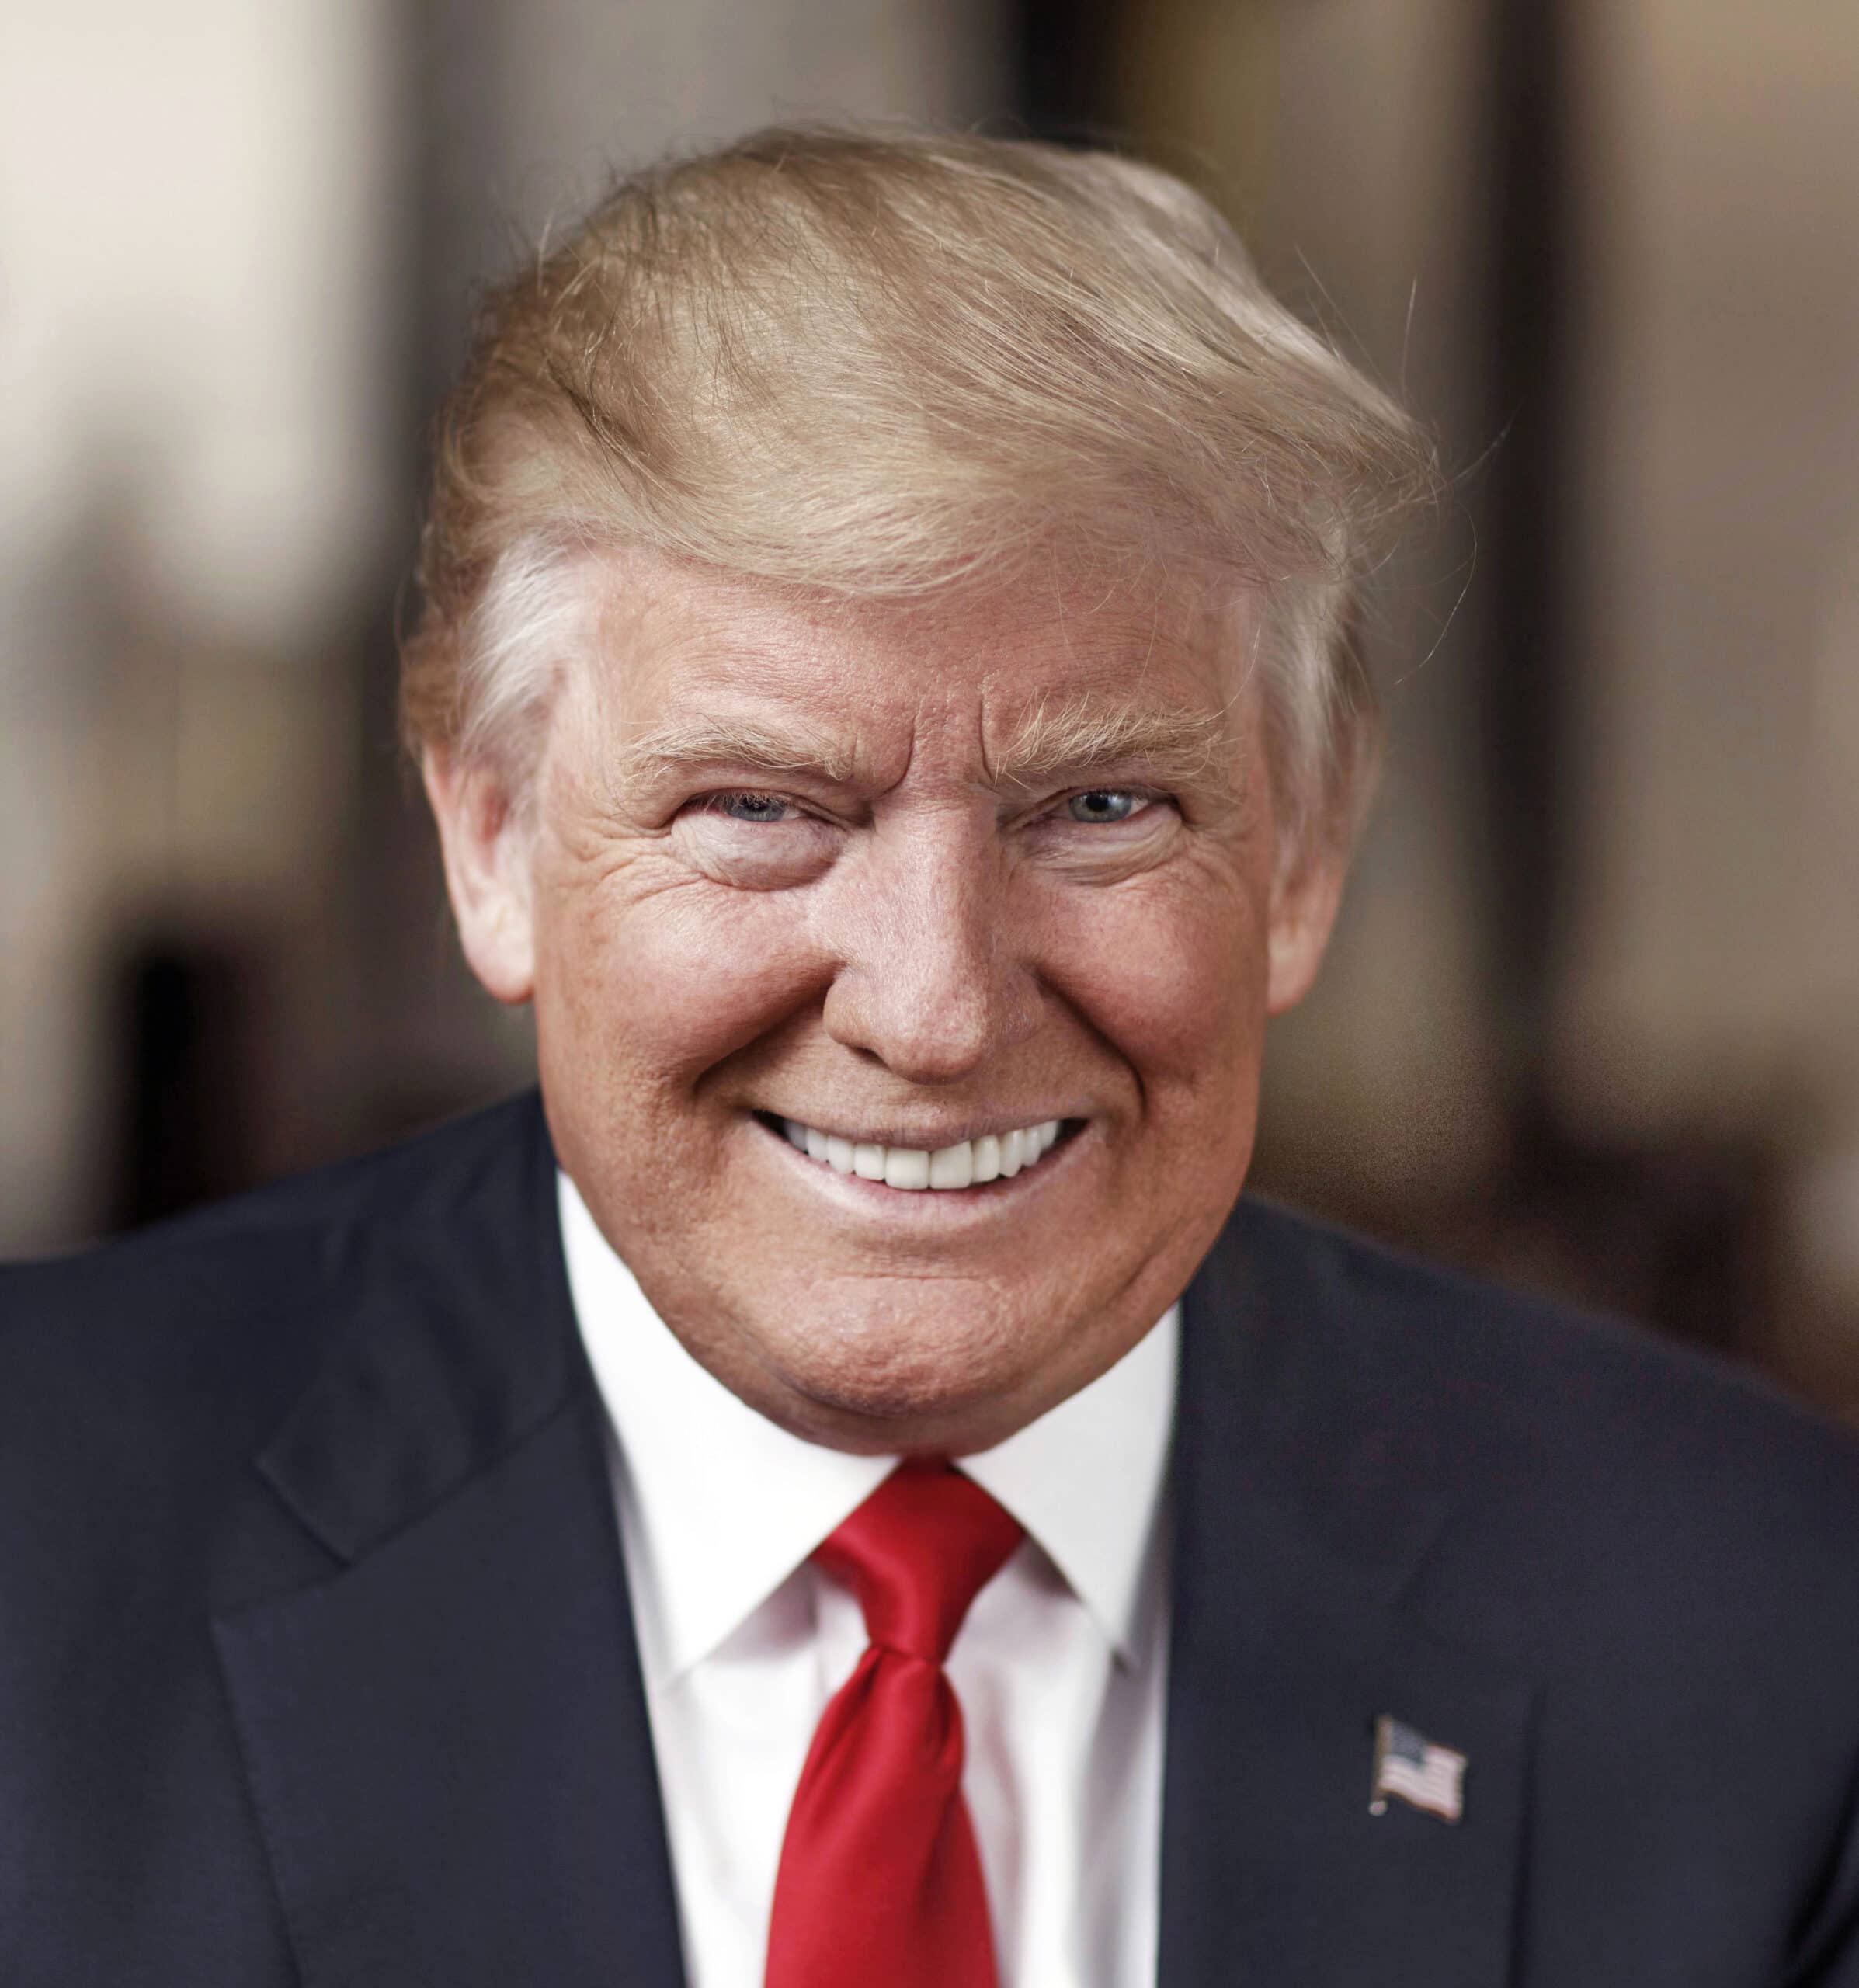 Trump smiles for the camera 